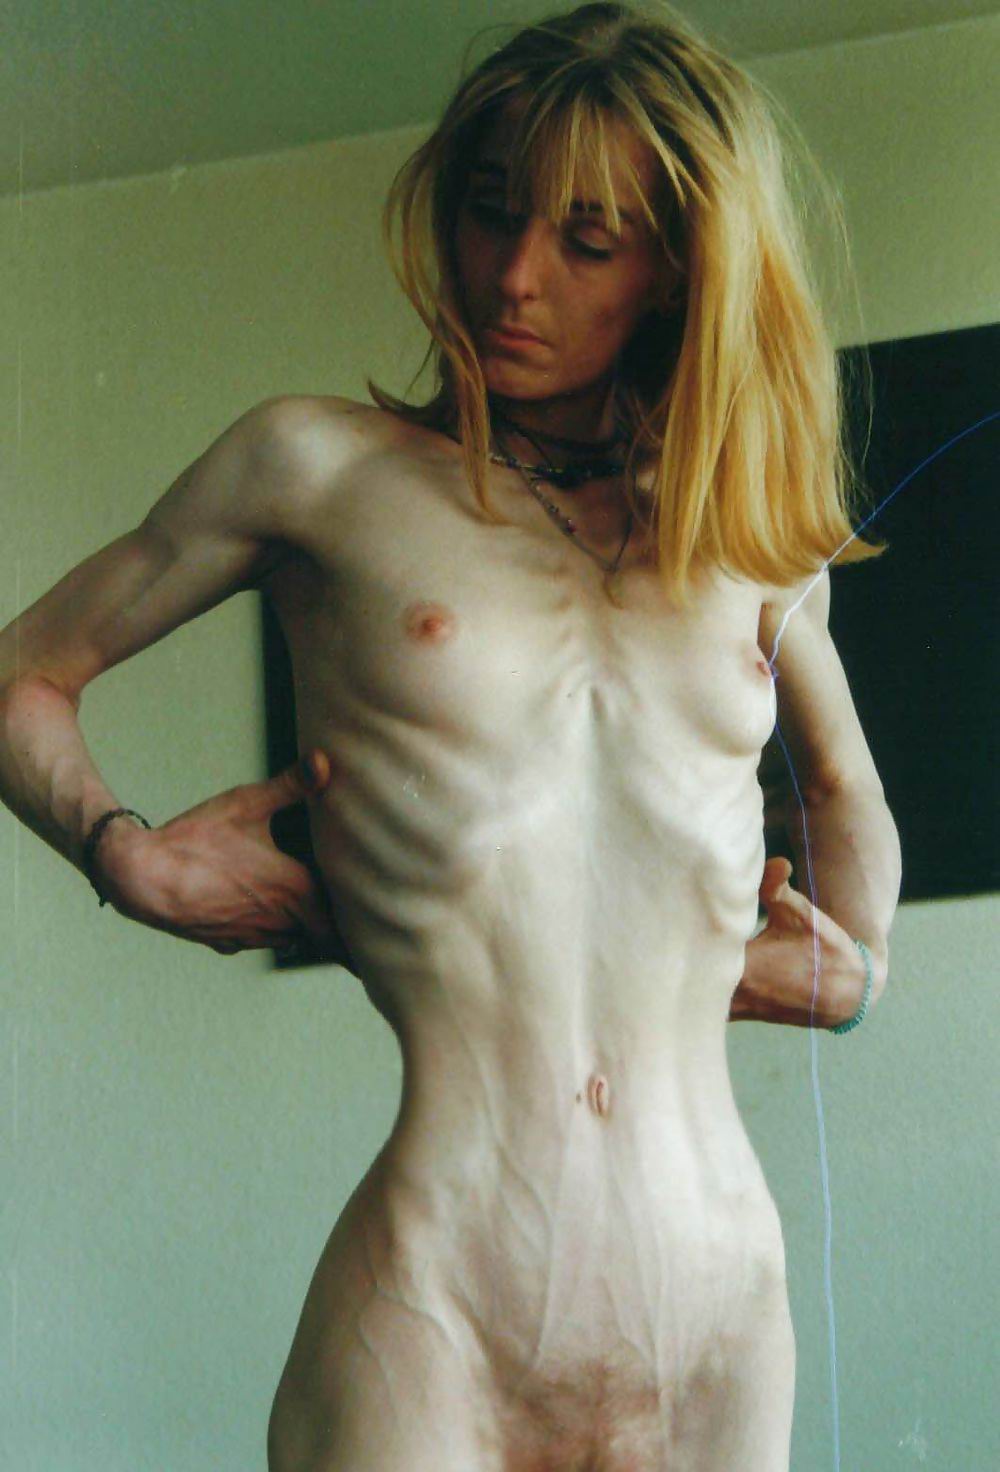 Anorexic naked women hard porn. NEW Adult website photos. Comments: 1